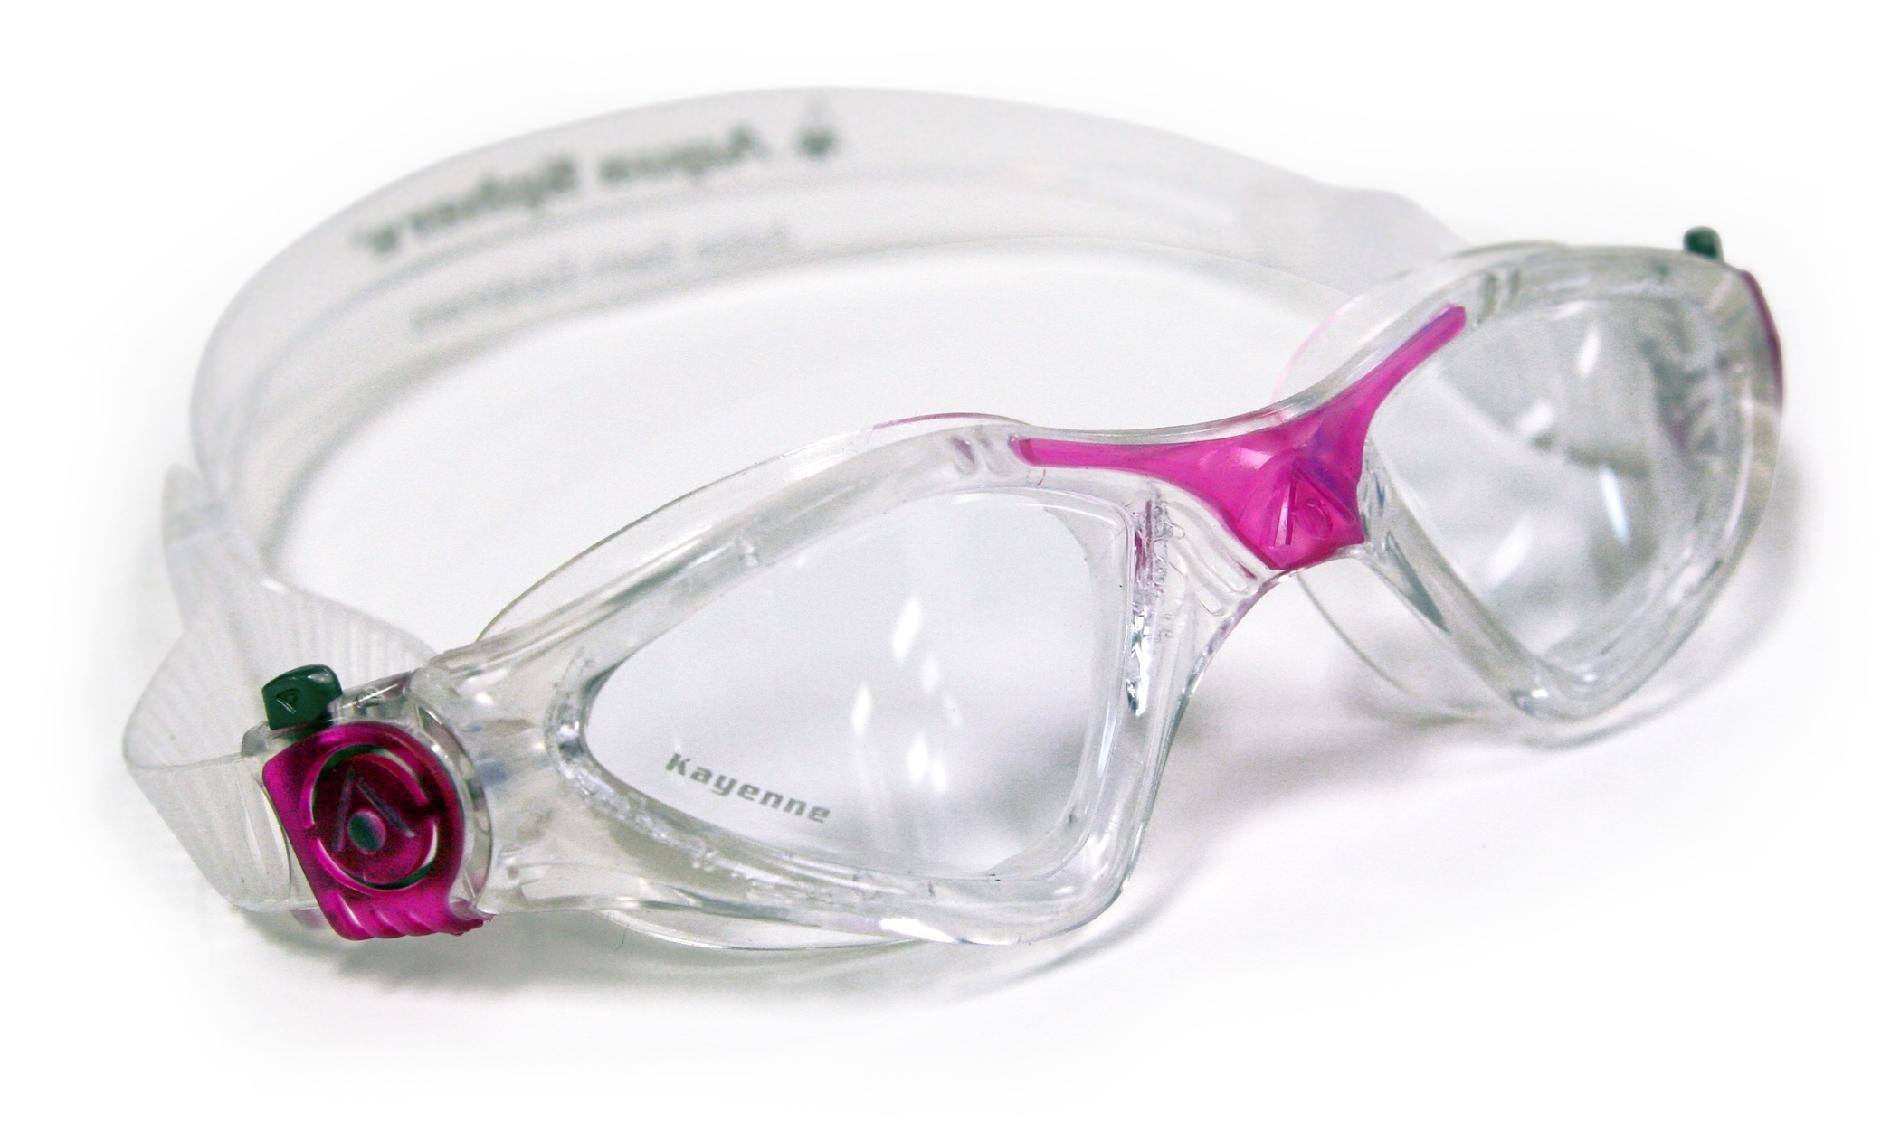 Kayenne Lady Goggles Clear Lens